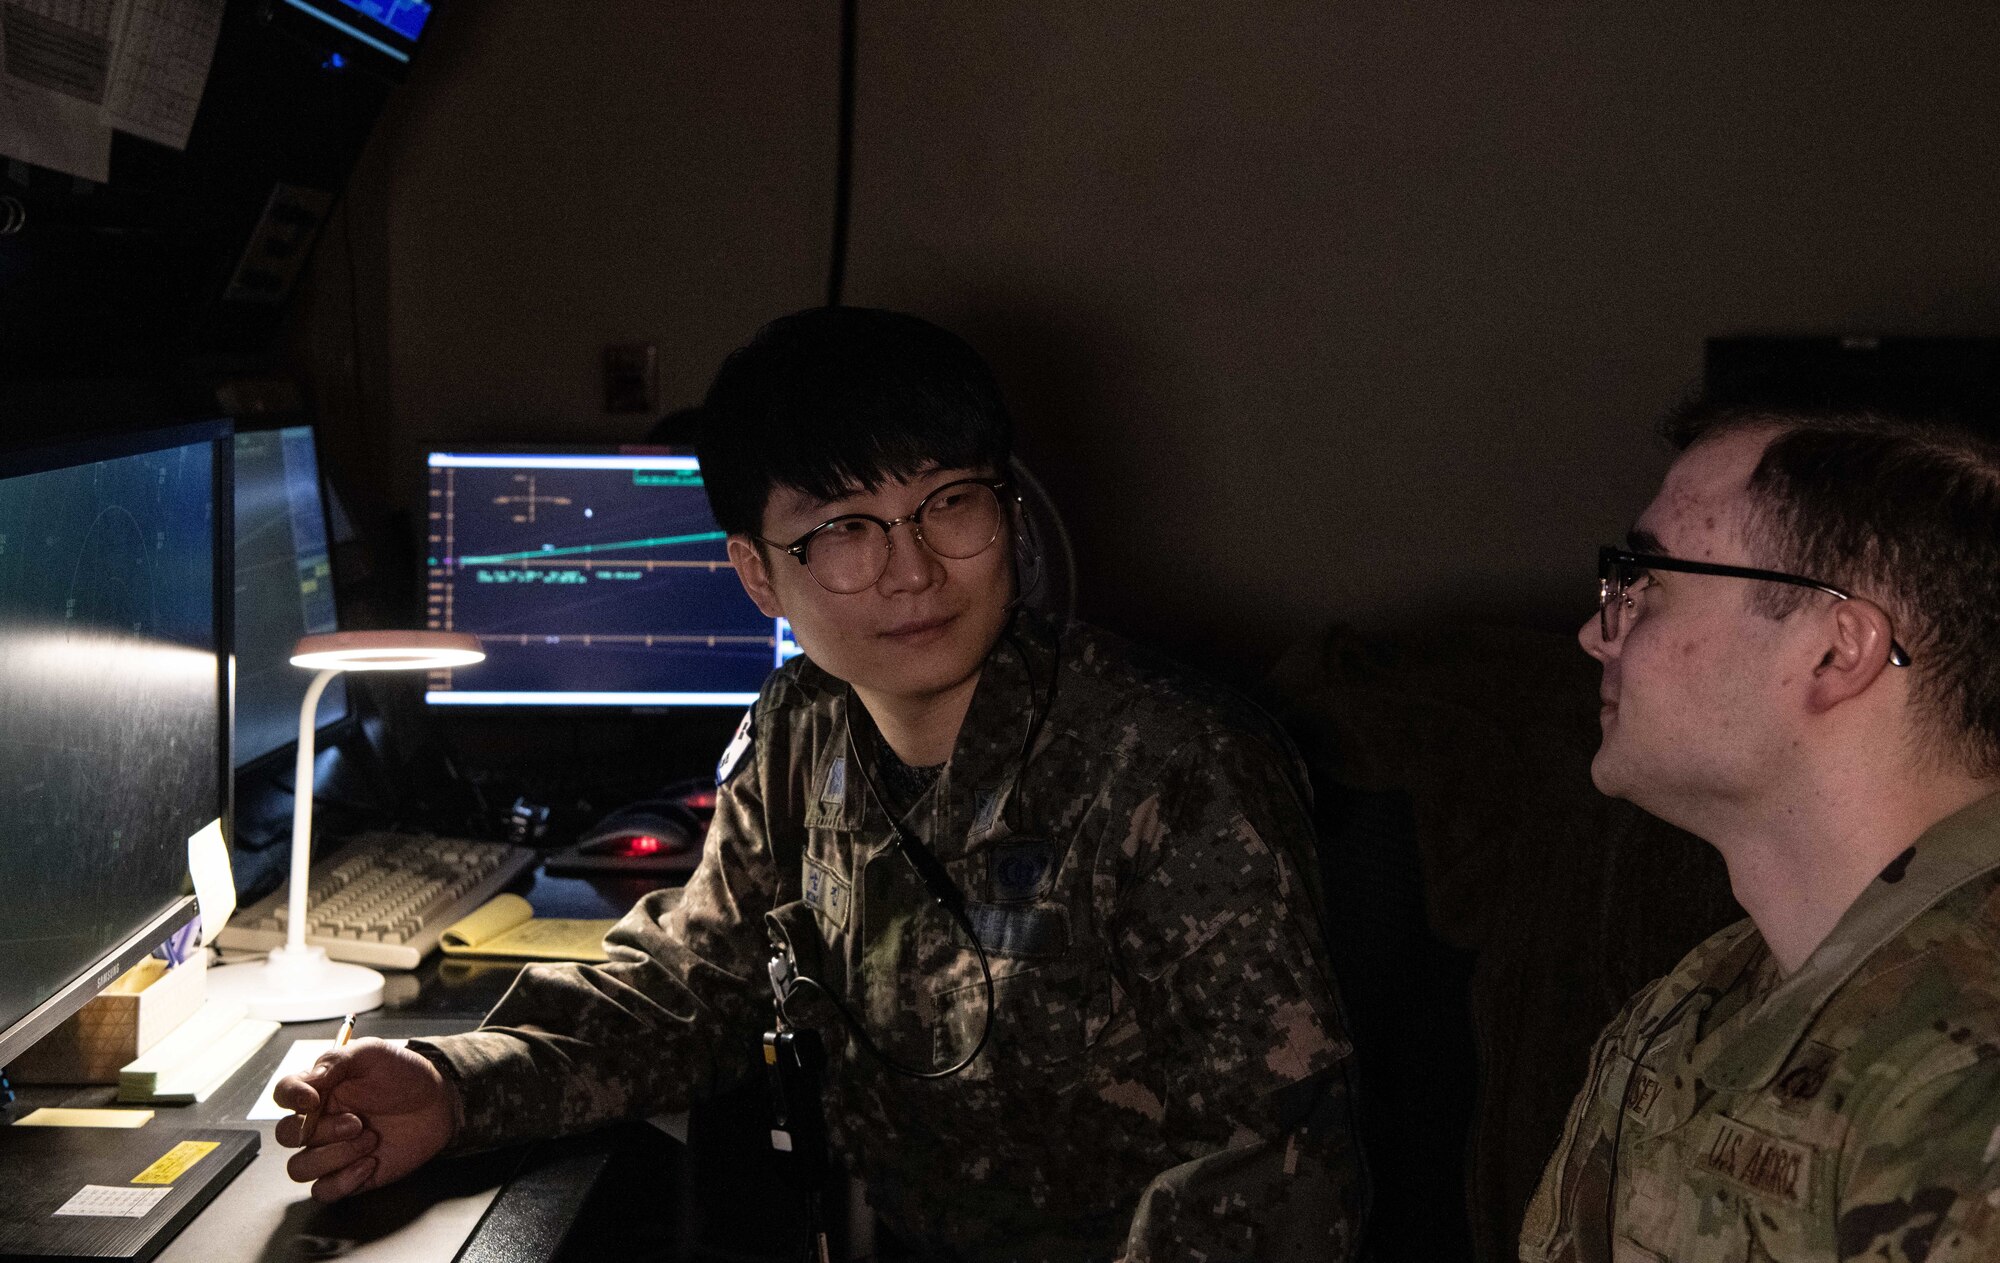 Republic of Korea Air Force Master Sgt. Seong Jin Kim (left), 38th Fighter Group operating branch radar controller, speaks with U.S. Air Force Staff Sgt. James Massey II, 8th Operations Support Squadron air traffic control (ATC) radar approach controller watch supervisor, at Kunsan Air Base, Republic of Korea, Feb. 16, 2023. When necessary, ROKAF personnel provided translation between different ATC facilities to remove any language barriers when needed. (U.S. Air Force photo by Staff Sgt. Sadie Colbert)